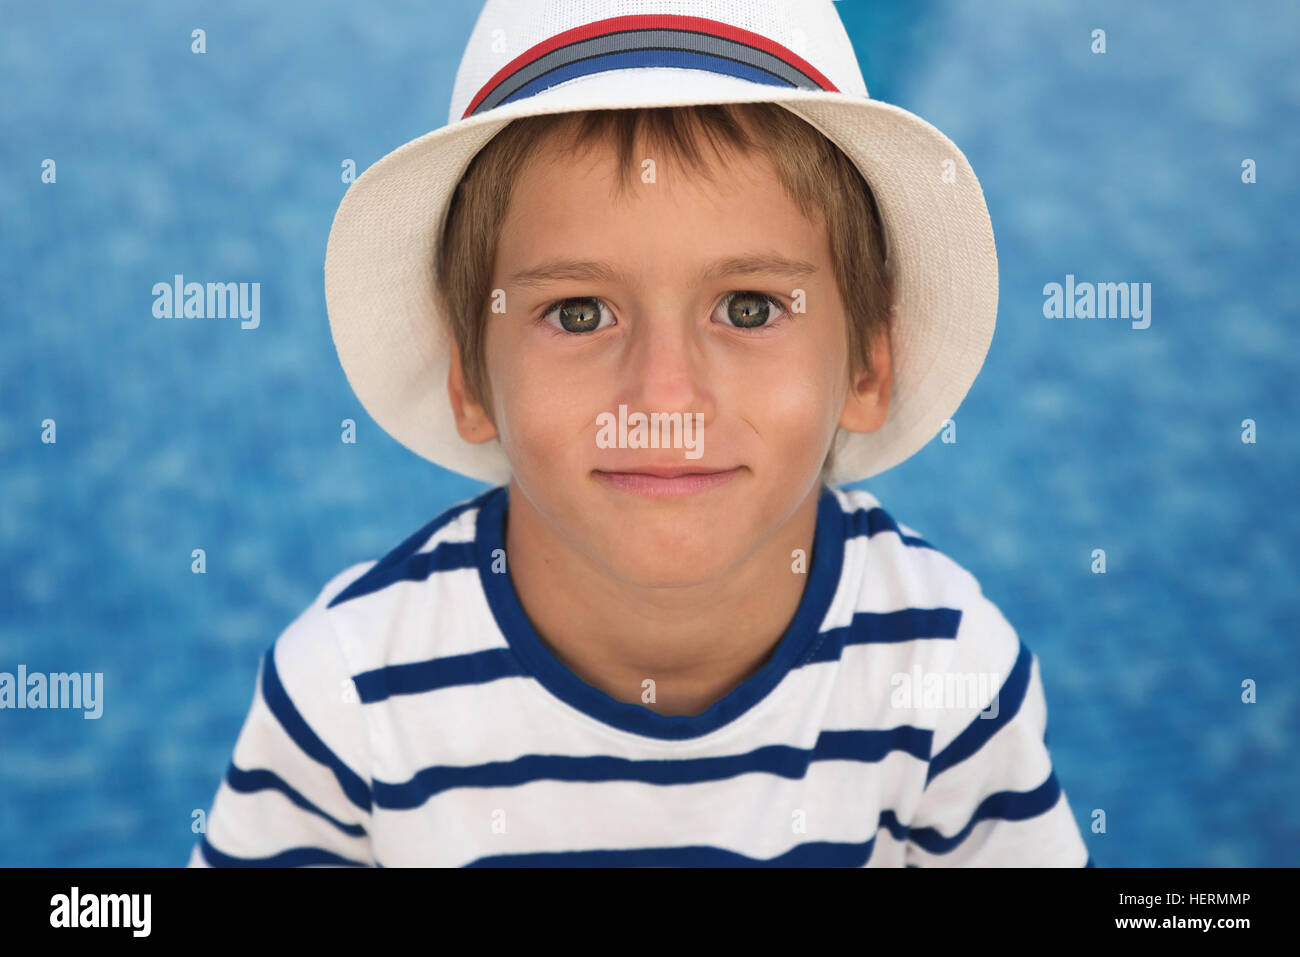 Portrait of a smiling boy by a pool wearing a summer hat Stock Photo